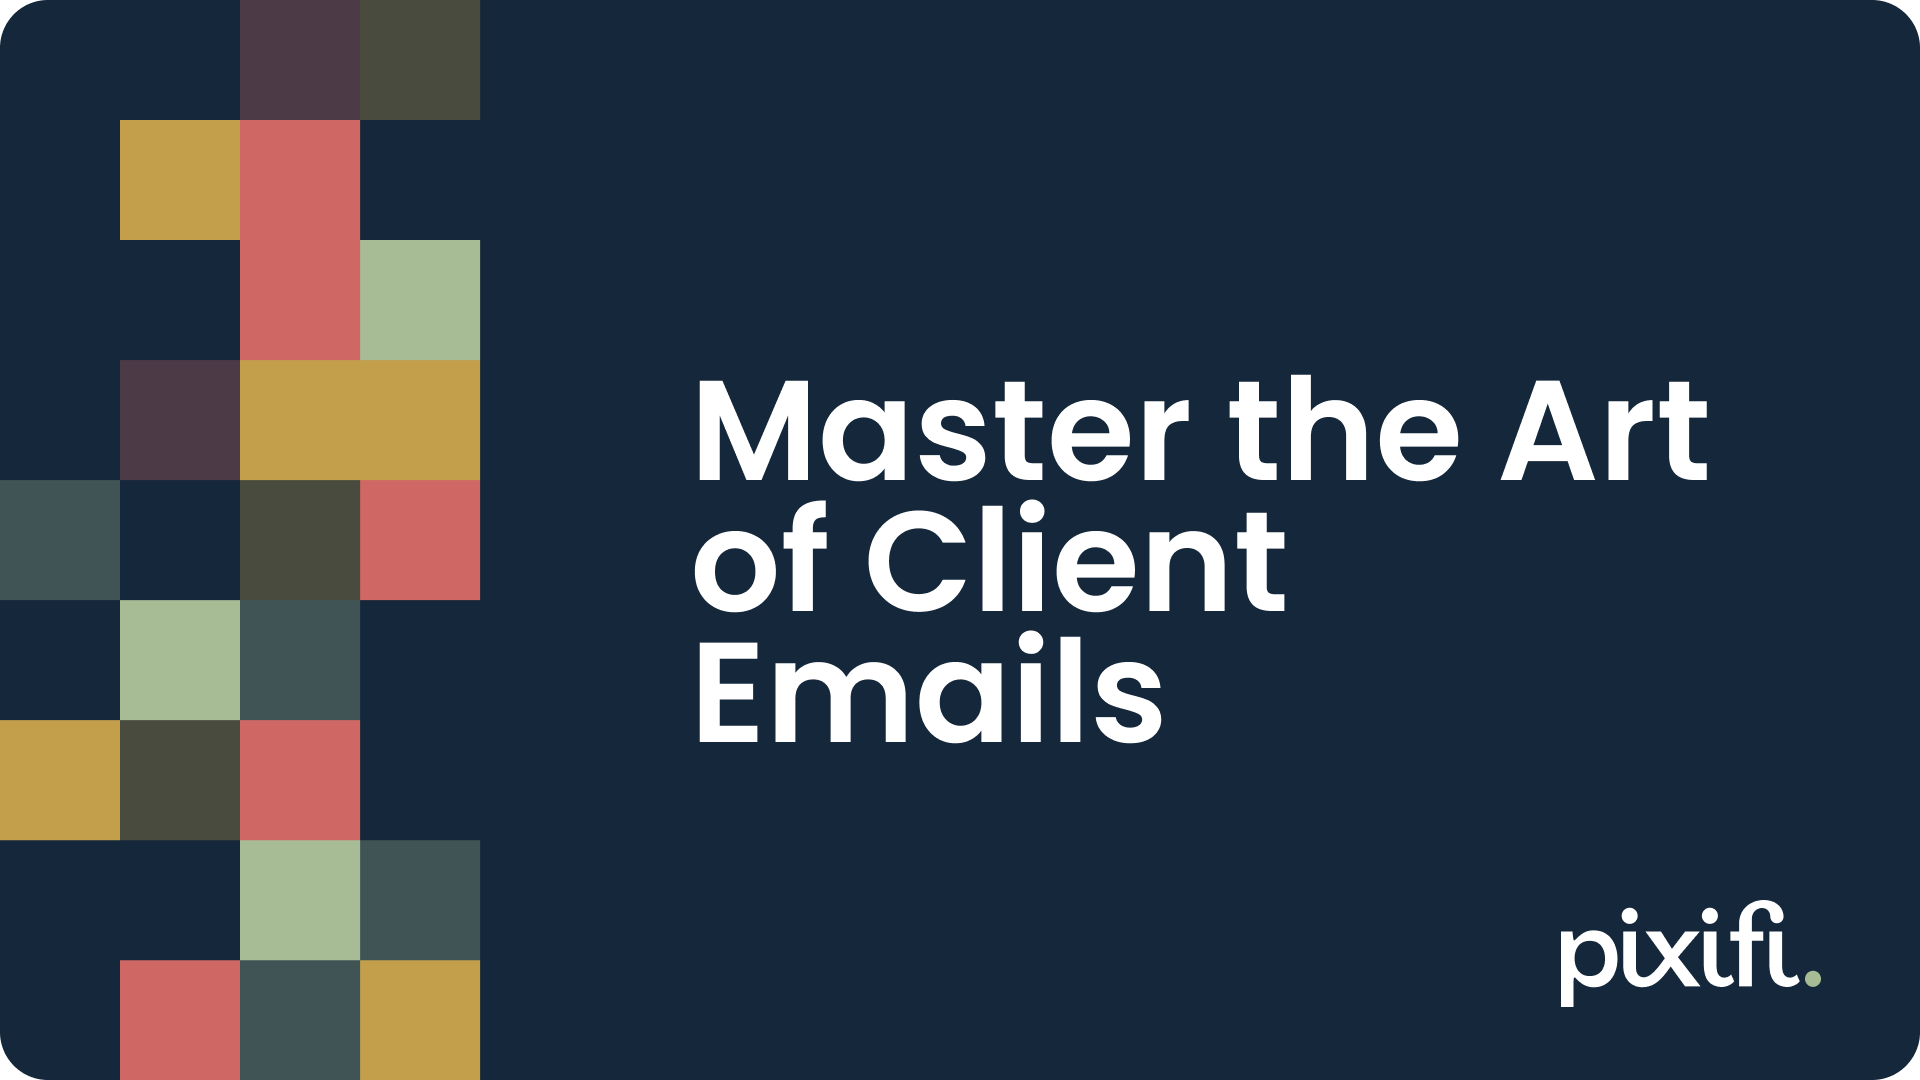 Master the Art of Client Emails